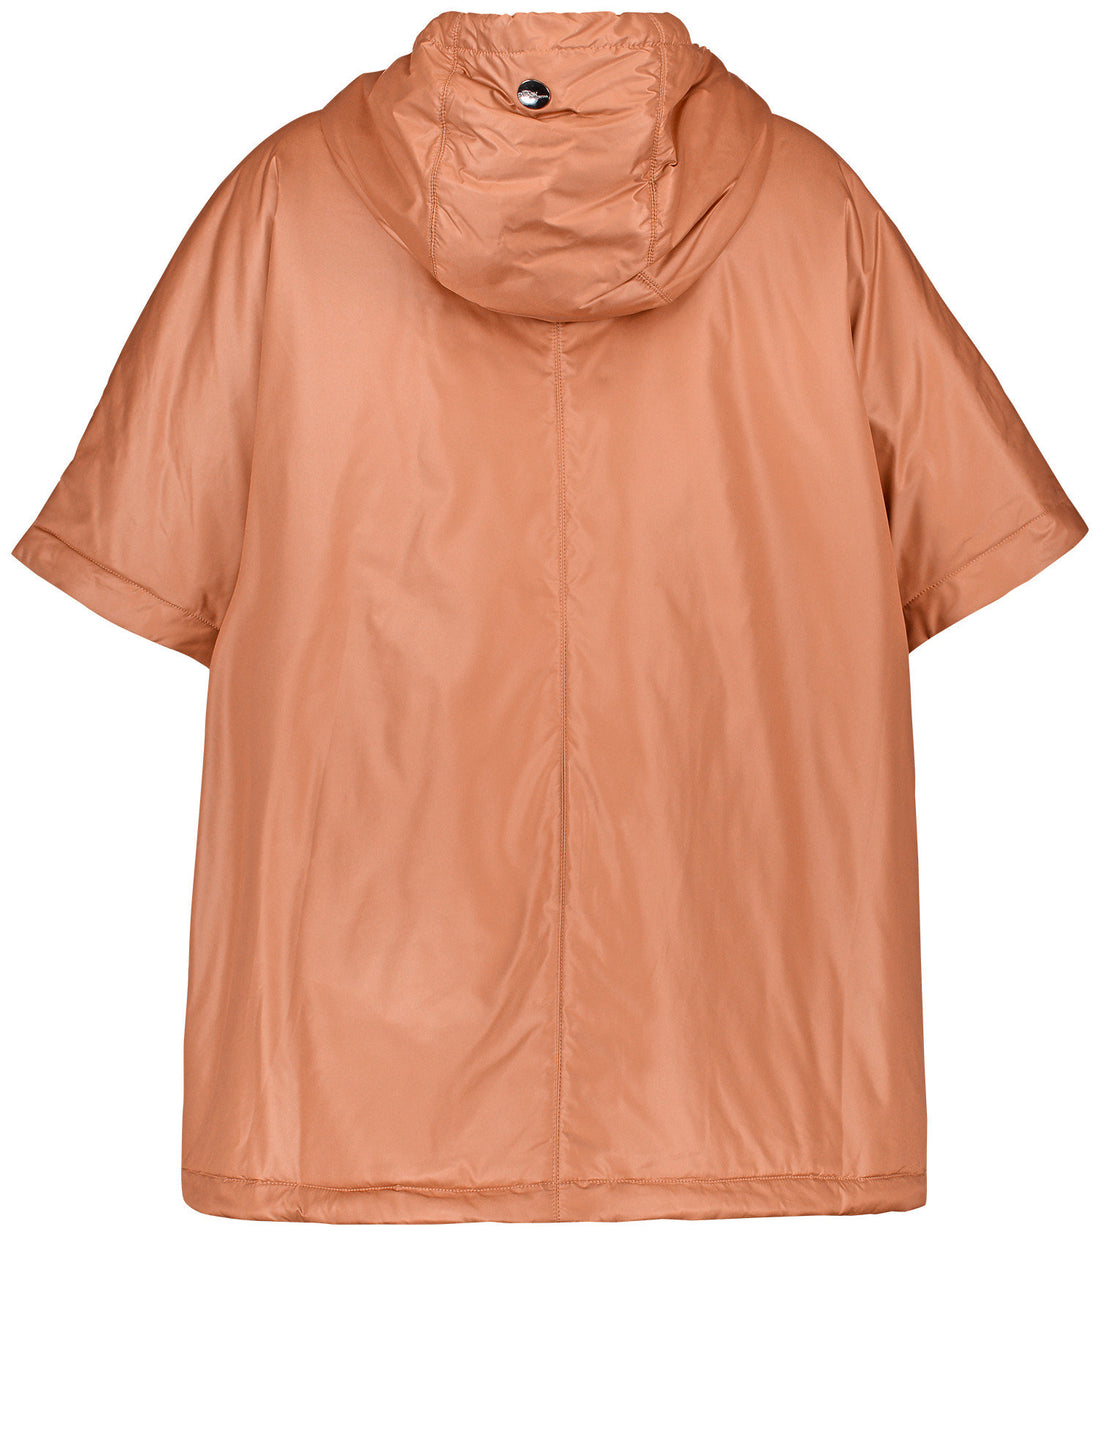 Red Short Sleeve Zip Up Poncho_340202-21601_7360_02